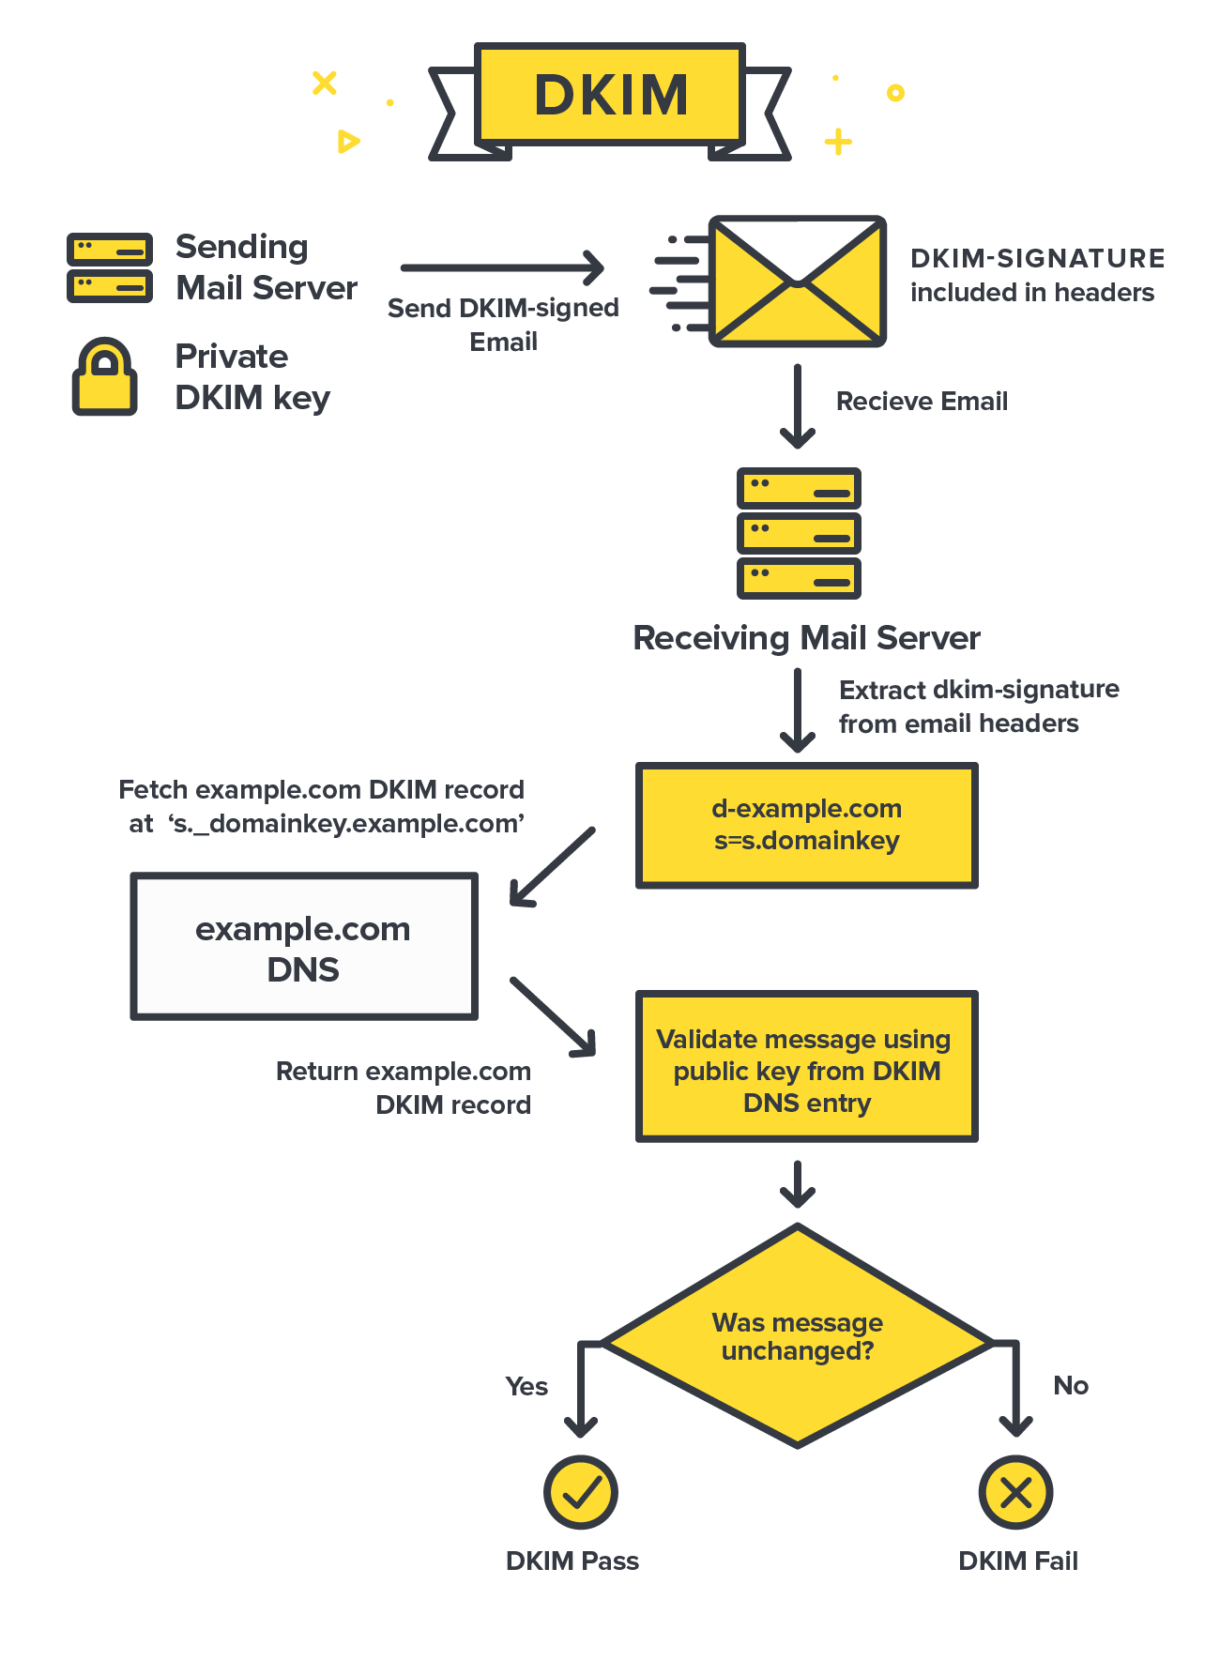 A flowchart visualizing the checks required for a DKIM pass